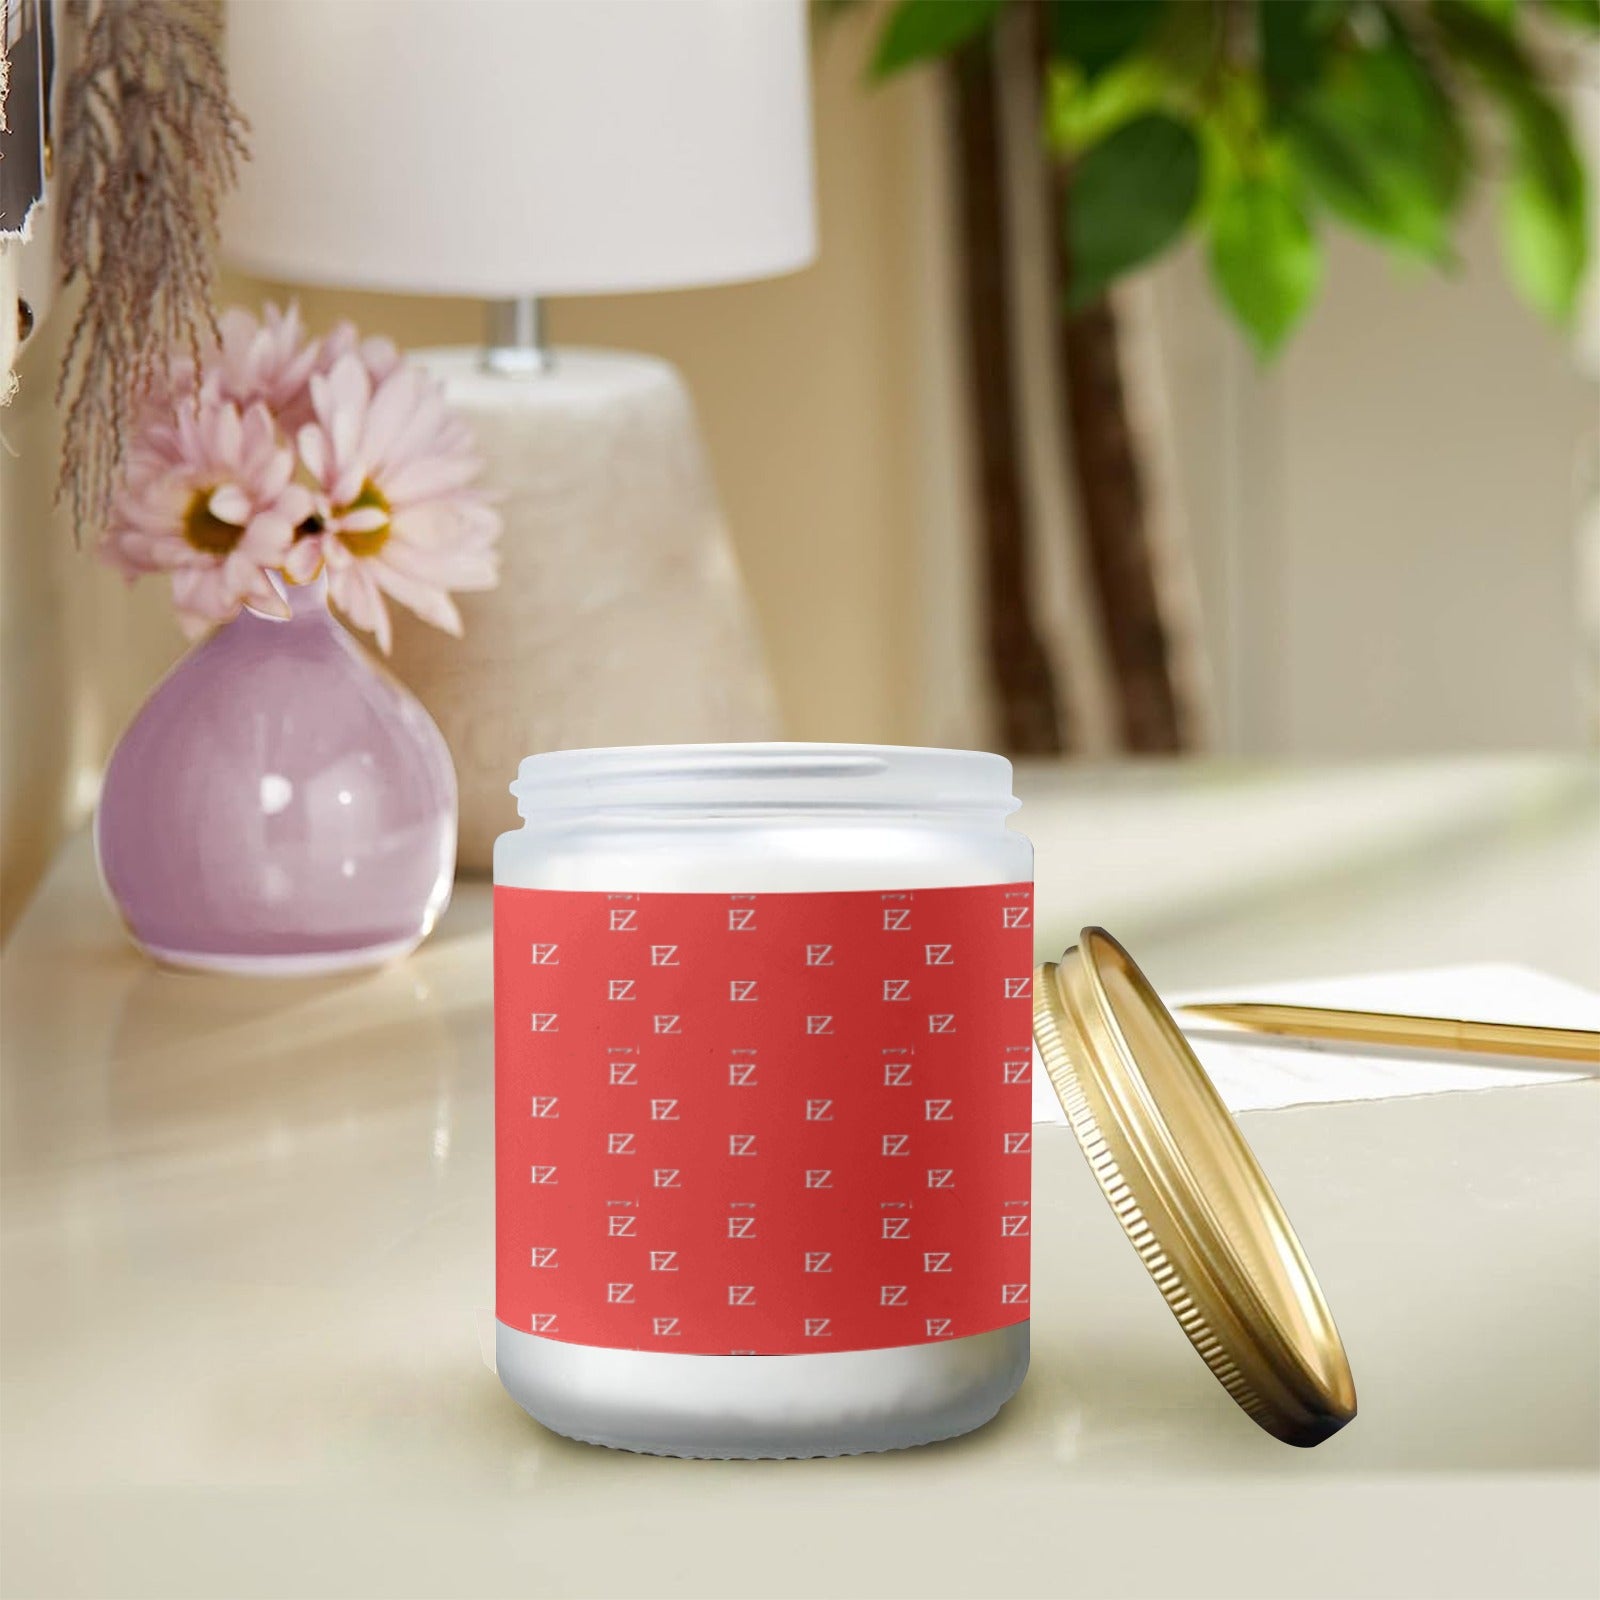 fz cented candles - red custom scented candle (made in queen)